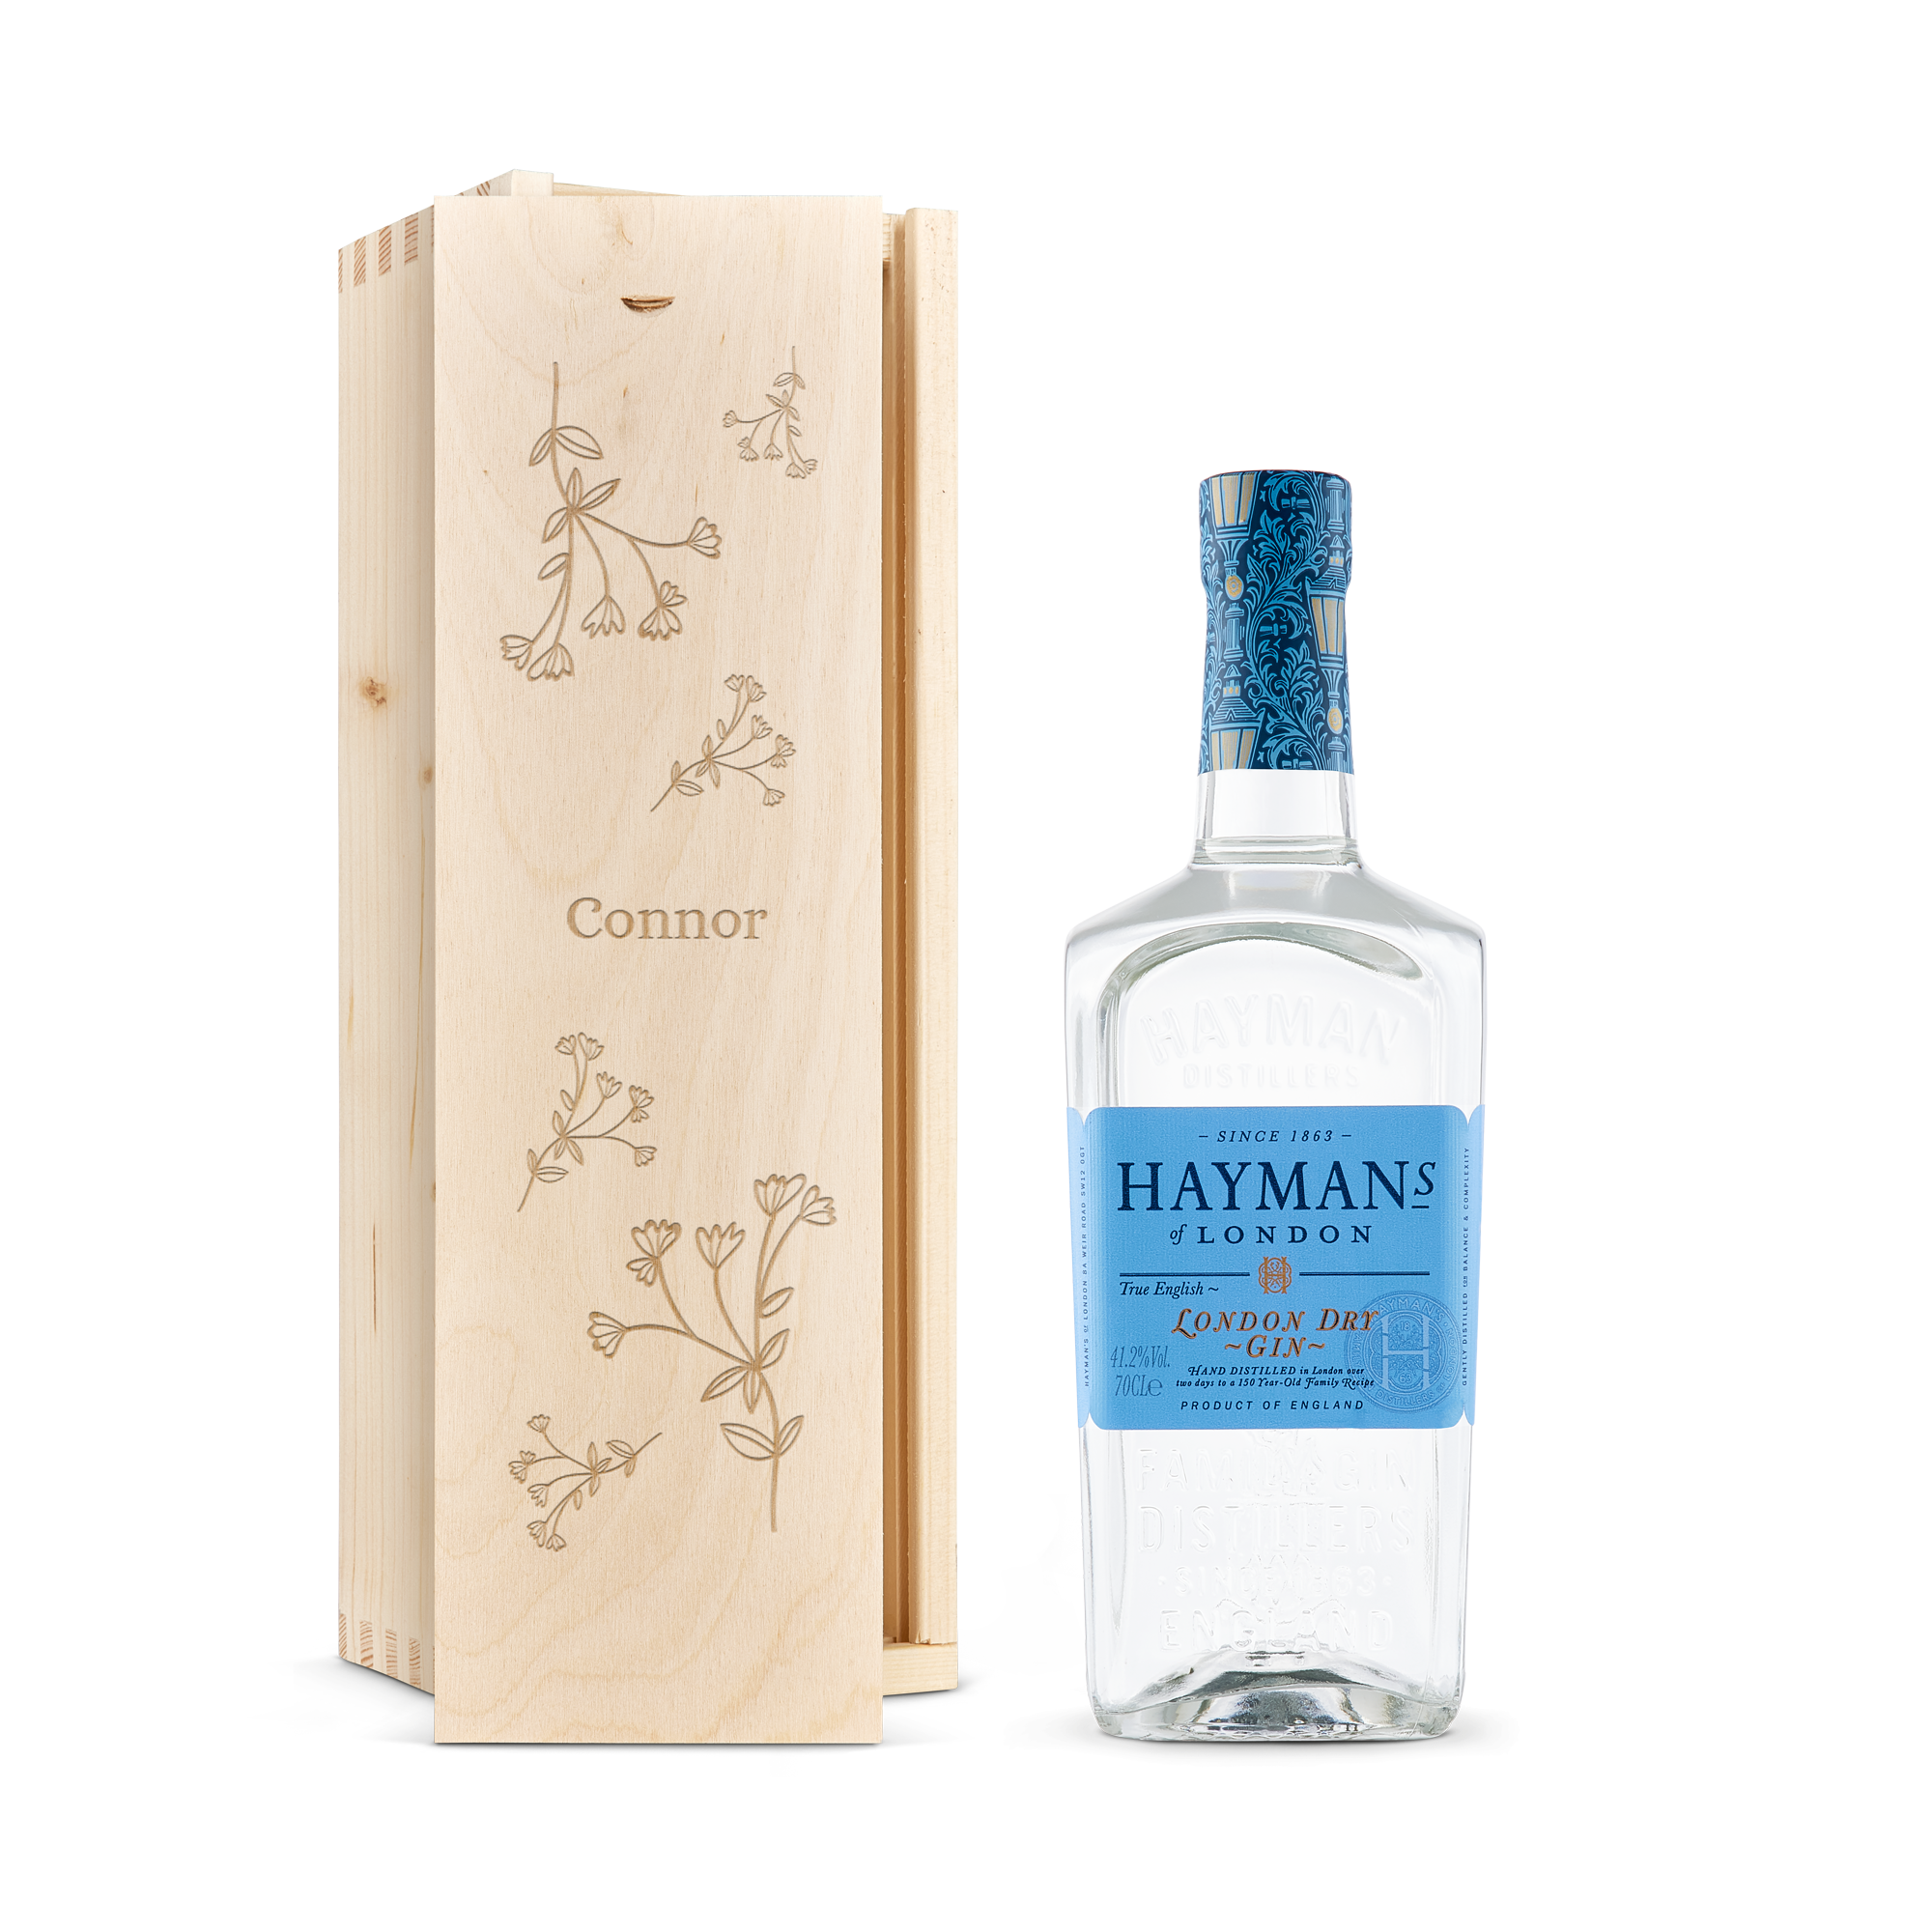 Personalised Gin Gift - Hayman's London Dry - Wooden Case